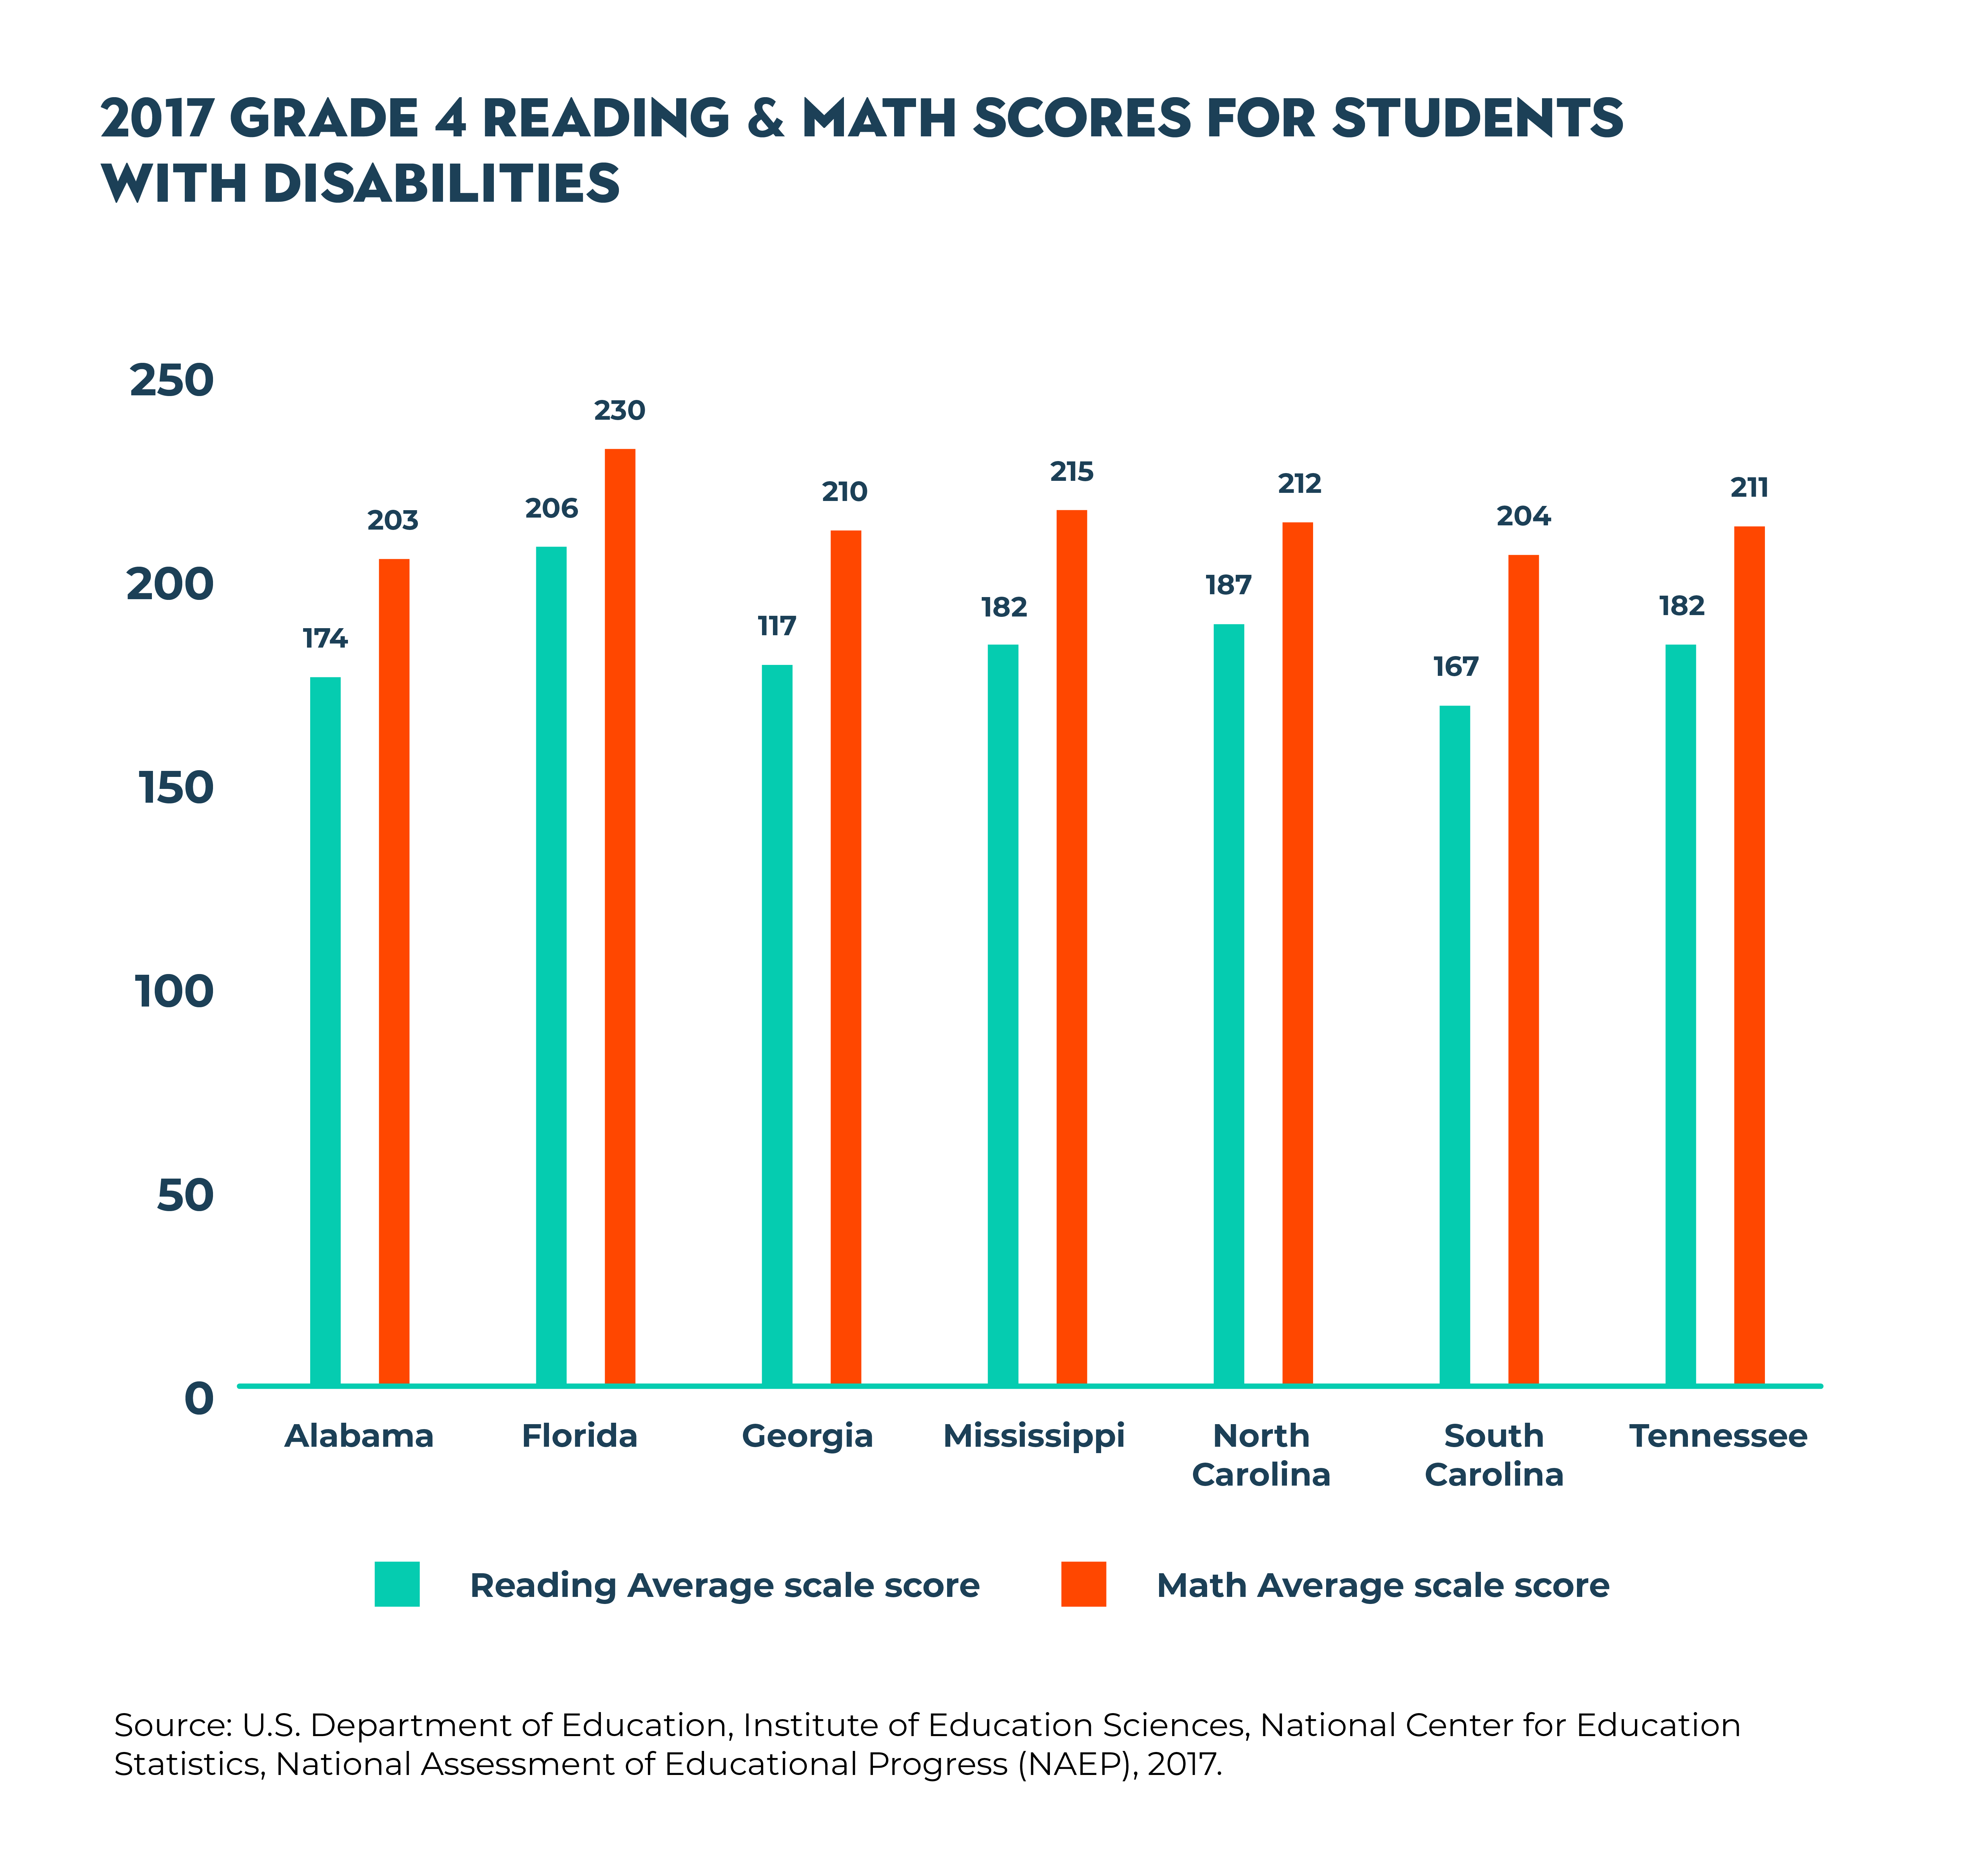 2017 grade 4 reading and math scores for students with disabilities